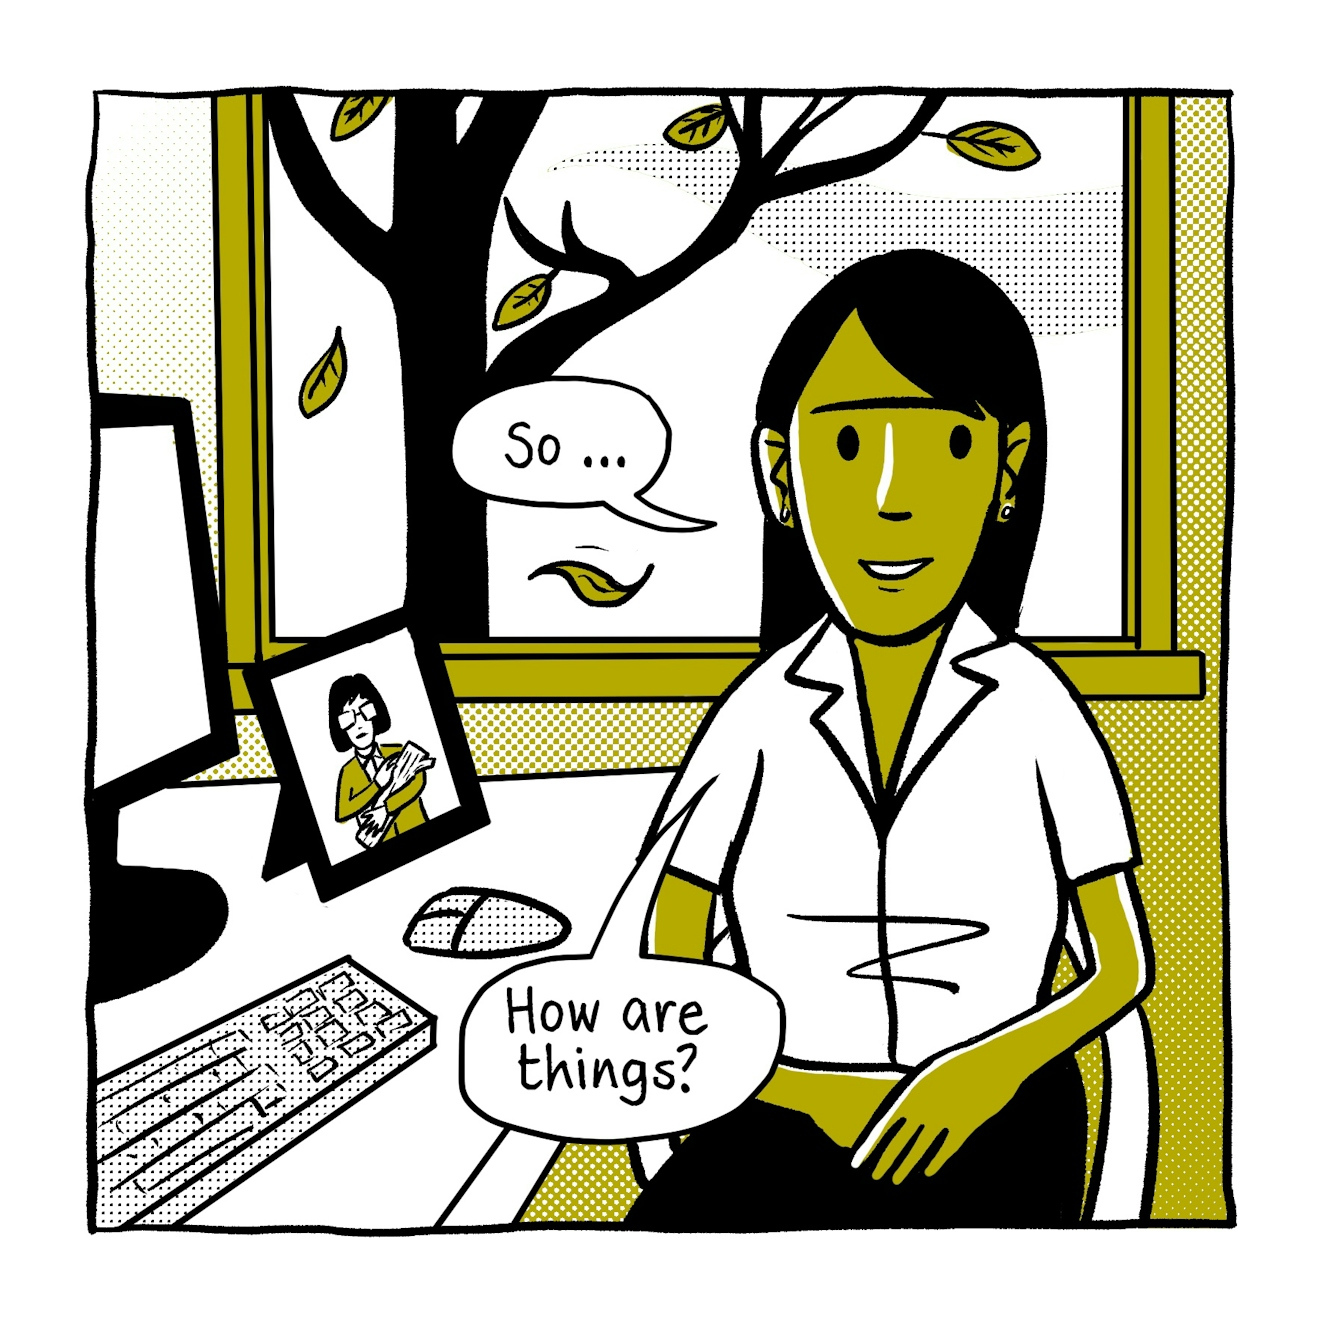 A four panel comic in black and white with a green accent tone. 

The first panel shows a female doctor sitting alongside her desk looking towards the viewer, hands gently resting in her lap. On her desk is a monitor, keyboard, mouse and a framed photo of a woman in glasses carrying a log. Behind the doctor is a window out onto a tree in autumn, losing its leaves. The doctor says, "So...How are things?".